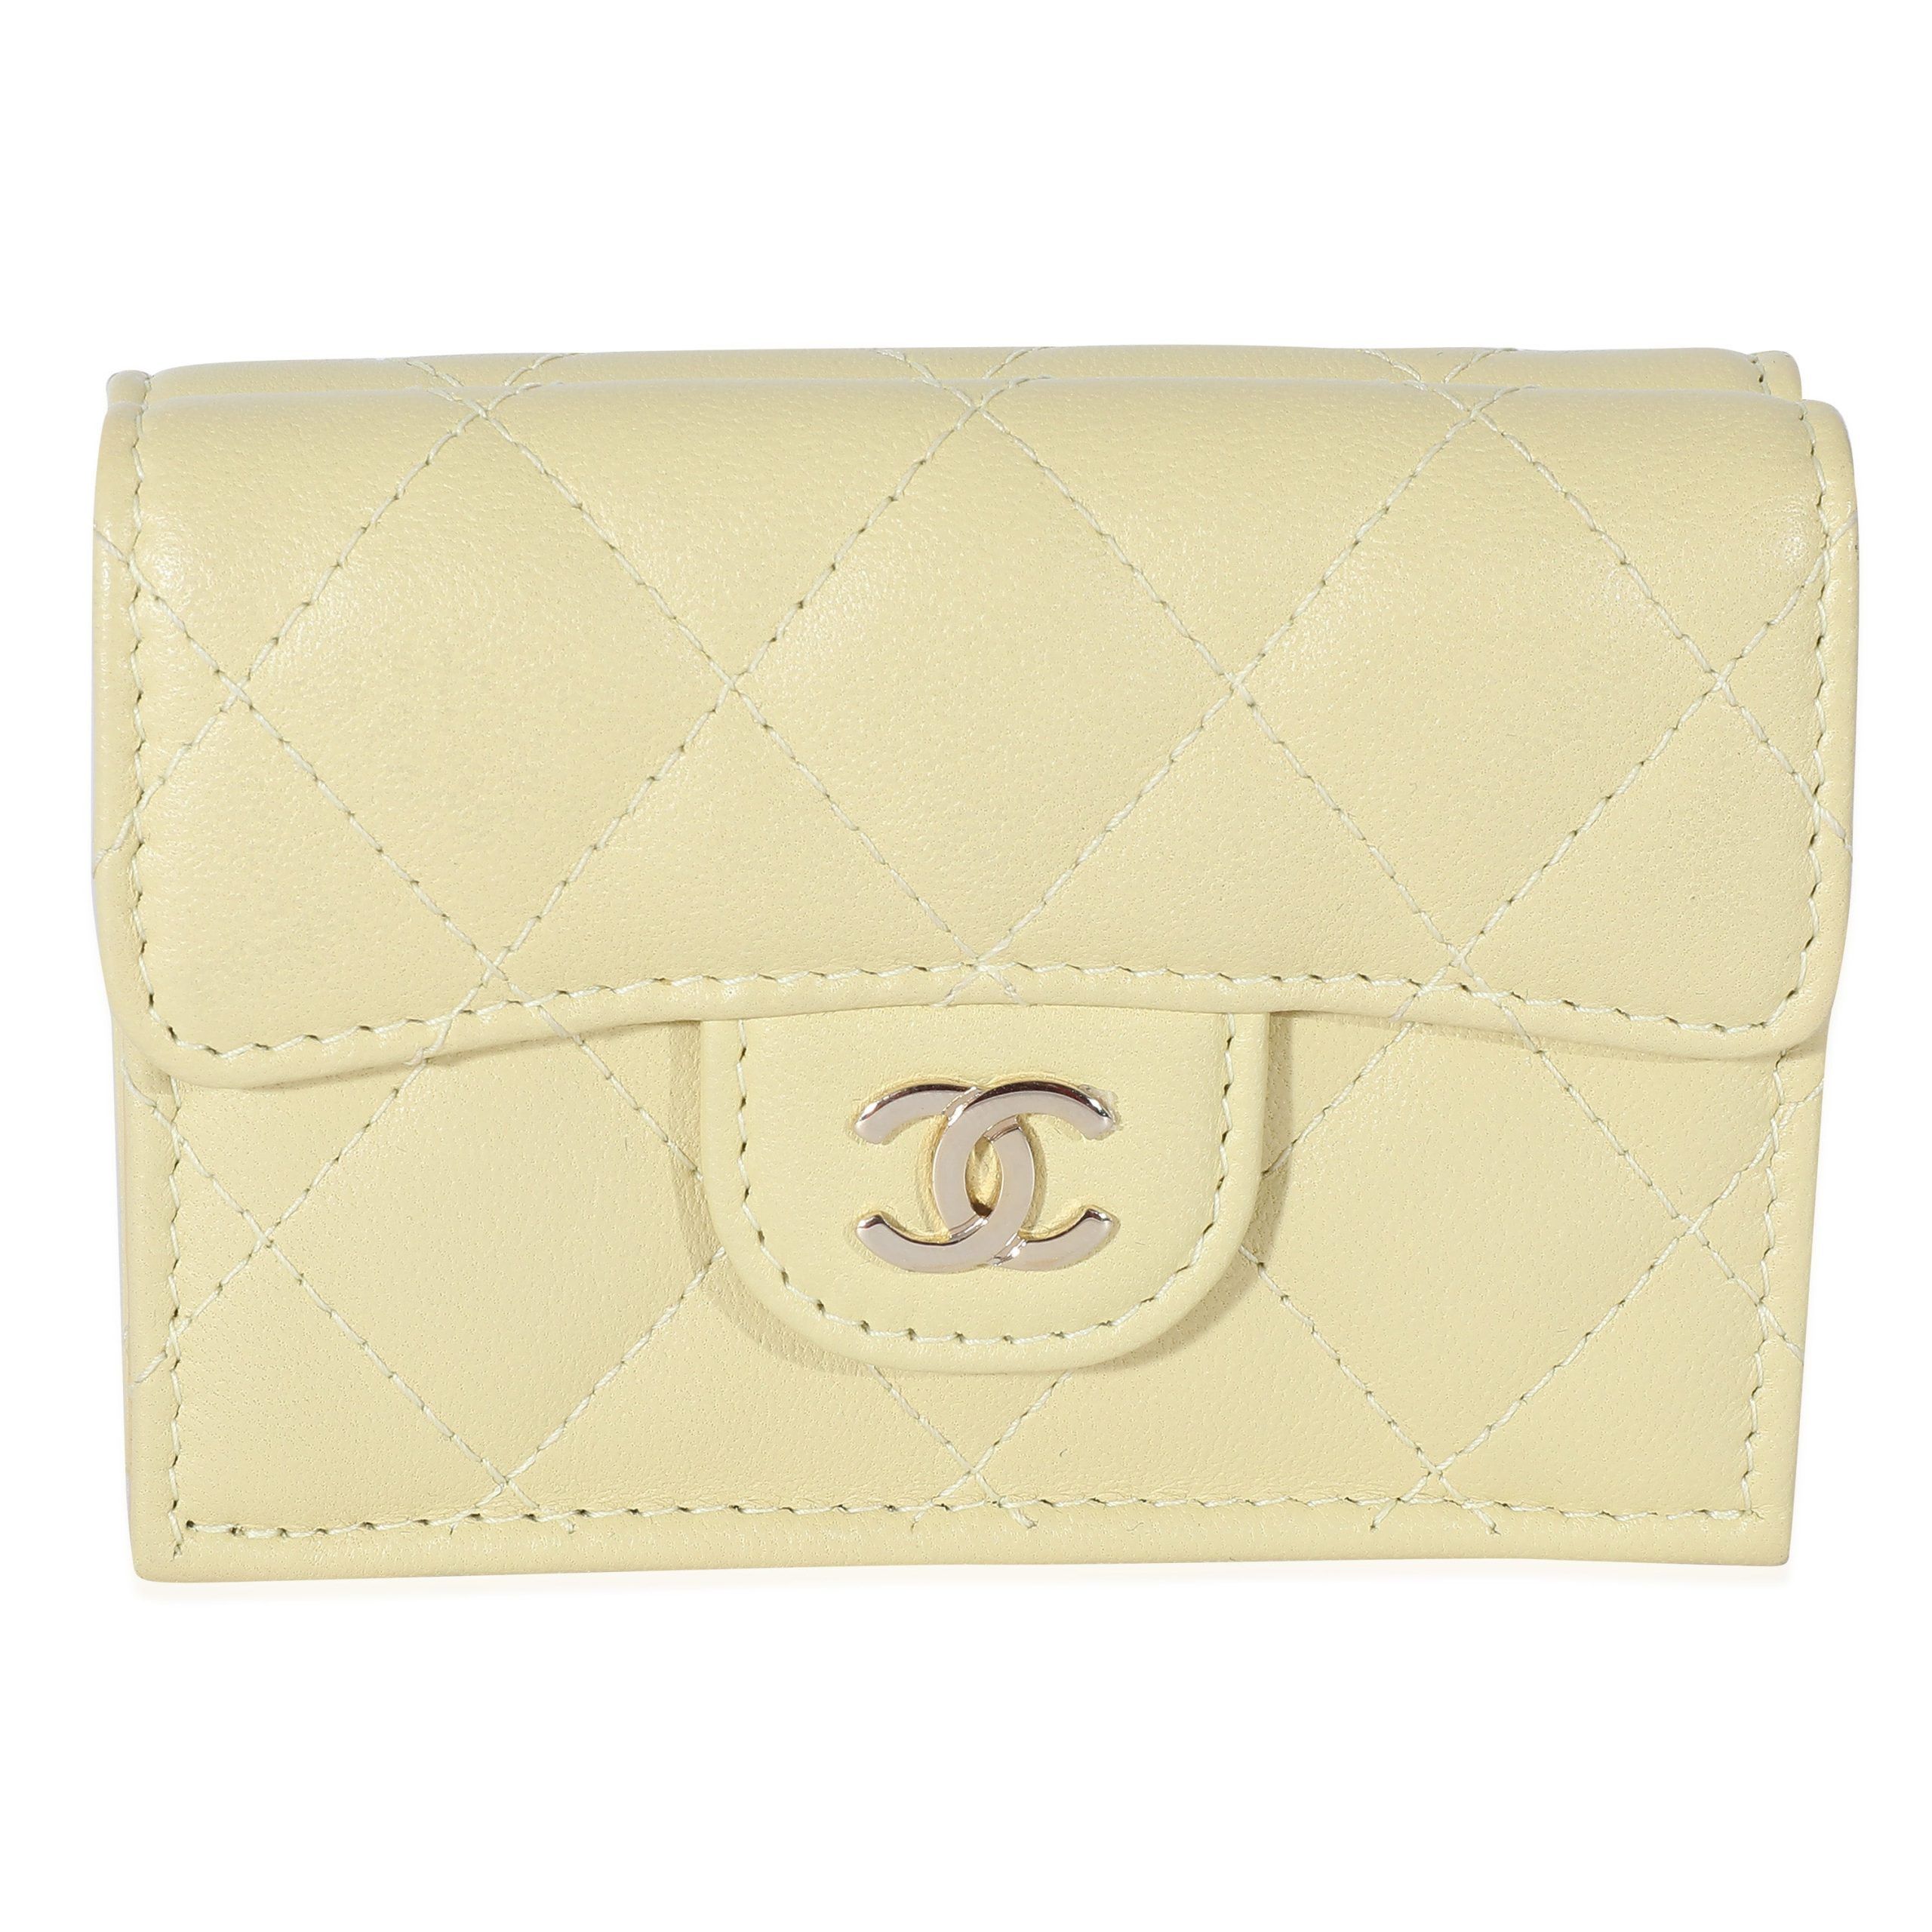 Chanel Chanel Yellow Quilted Lambskin Small Flap Wallet Size ONE SIZE - 1 Preview